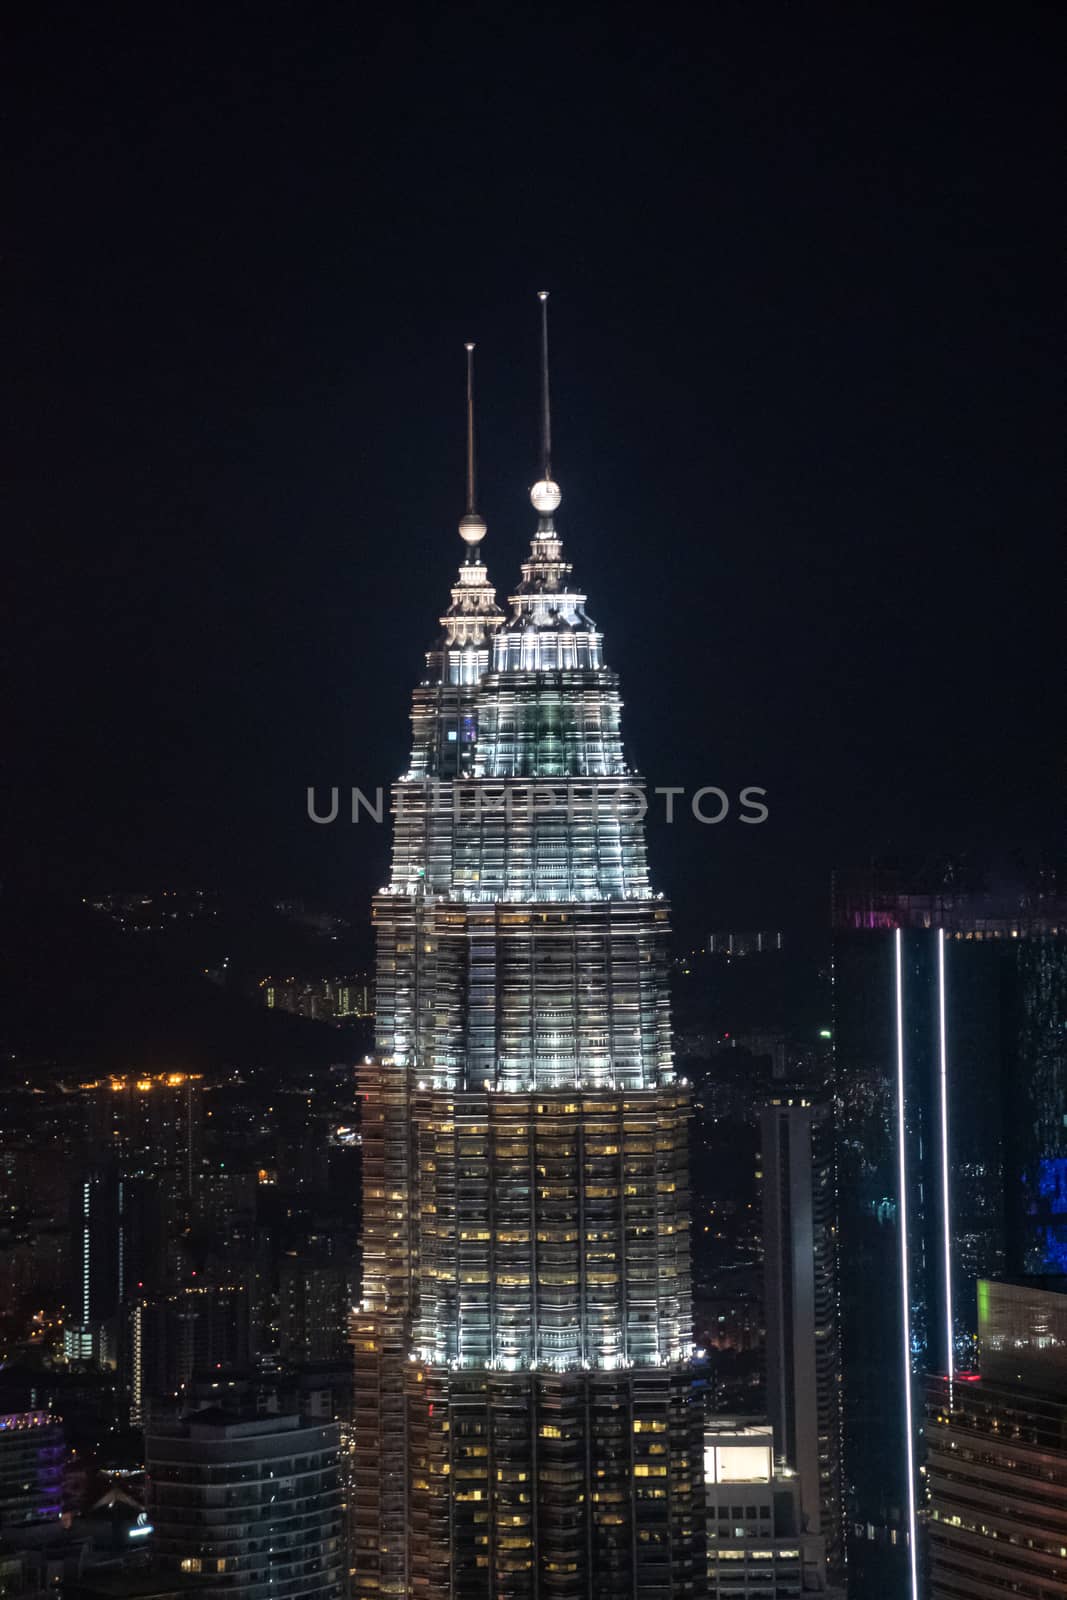 Twin towers in Kuala Lumpur during nigh over viewing illuminated highrise buildings by MXW_Stock